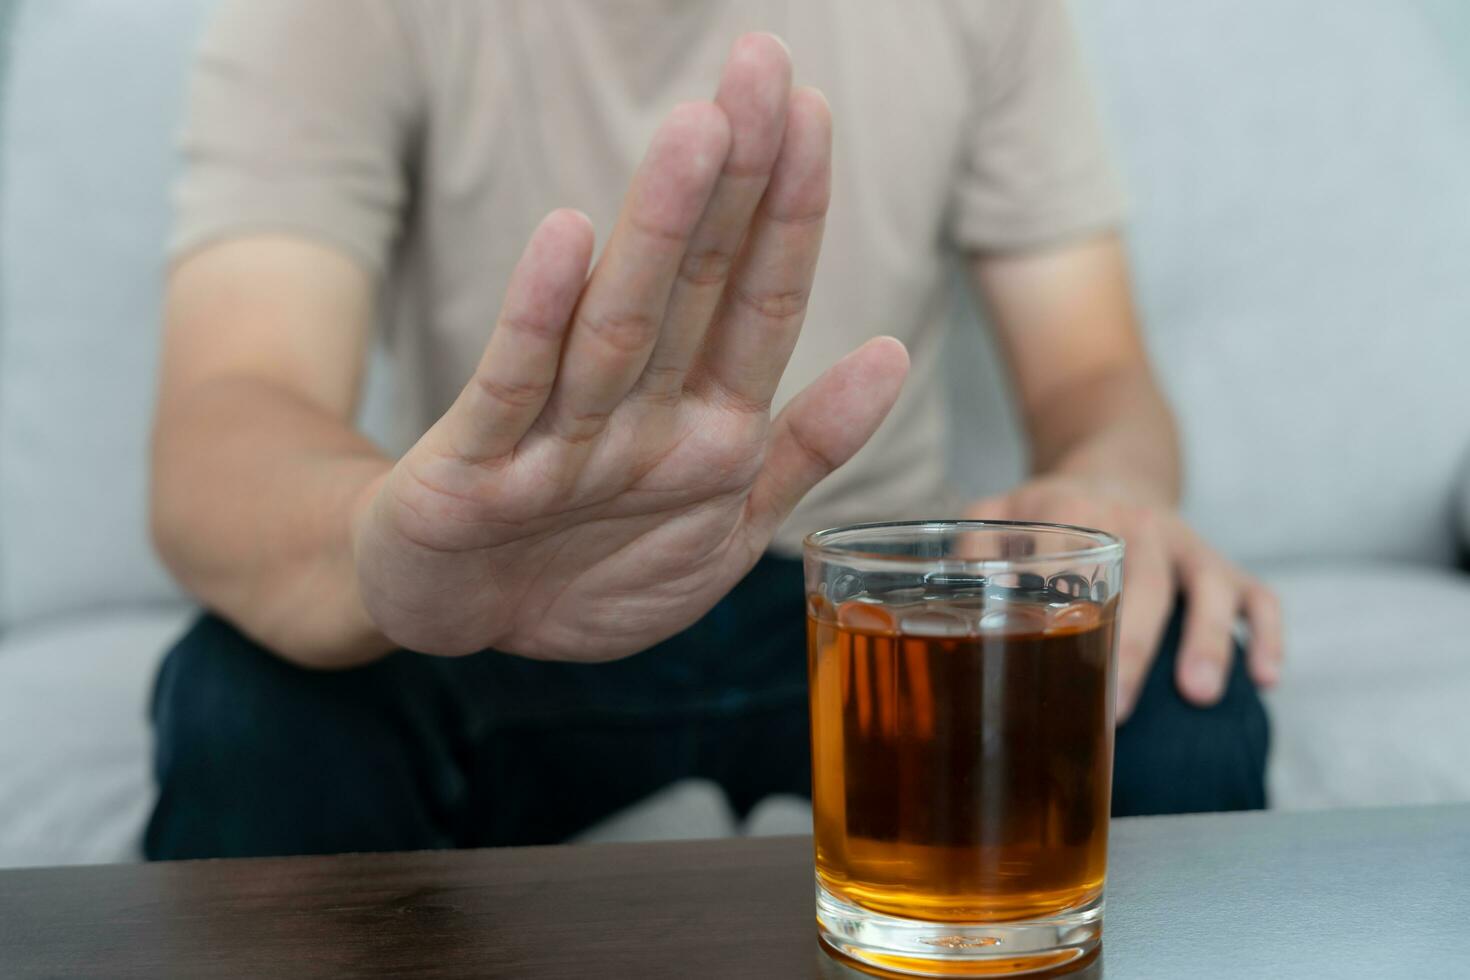 man refuses say no and avoid to drink an alcohol whiskey , stopping hand sign male, alcoholism treatment, alcohol addiction, quit booze, Stop Drinking Alcohol. Refuse Glass liquor, unhealthy, reject photo